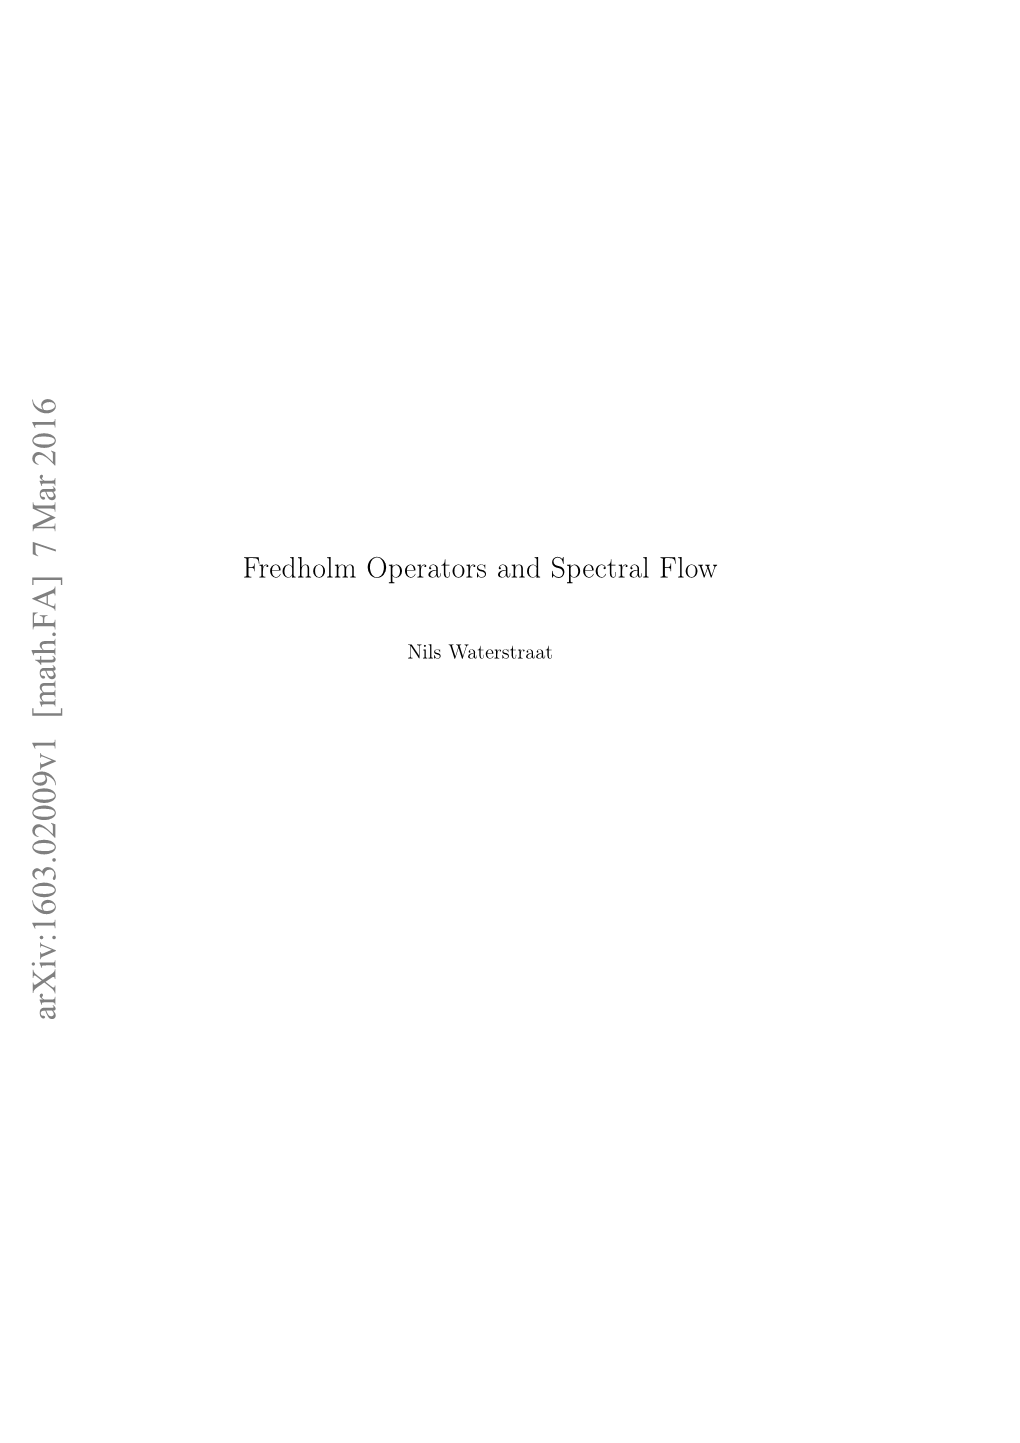 Fredholm Operators and Spectral Flow, Canad